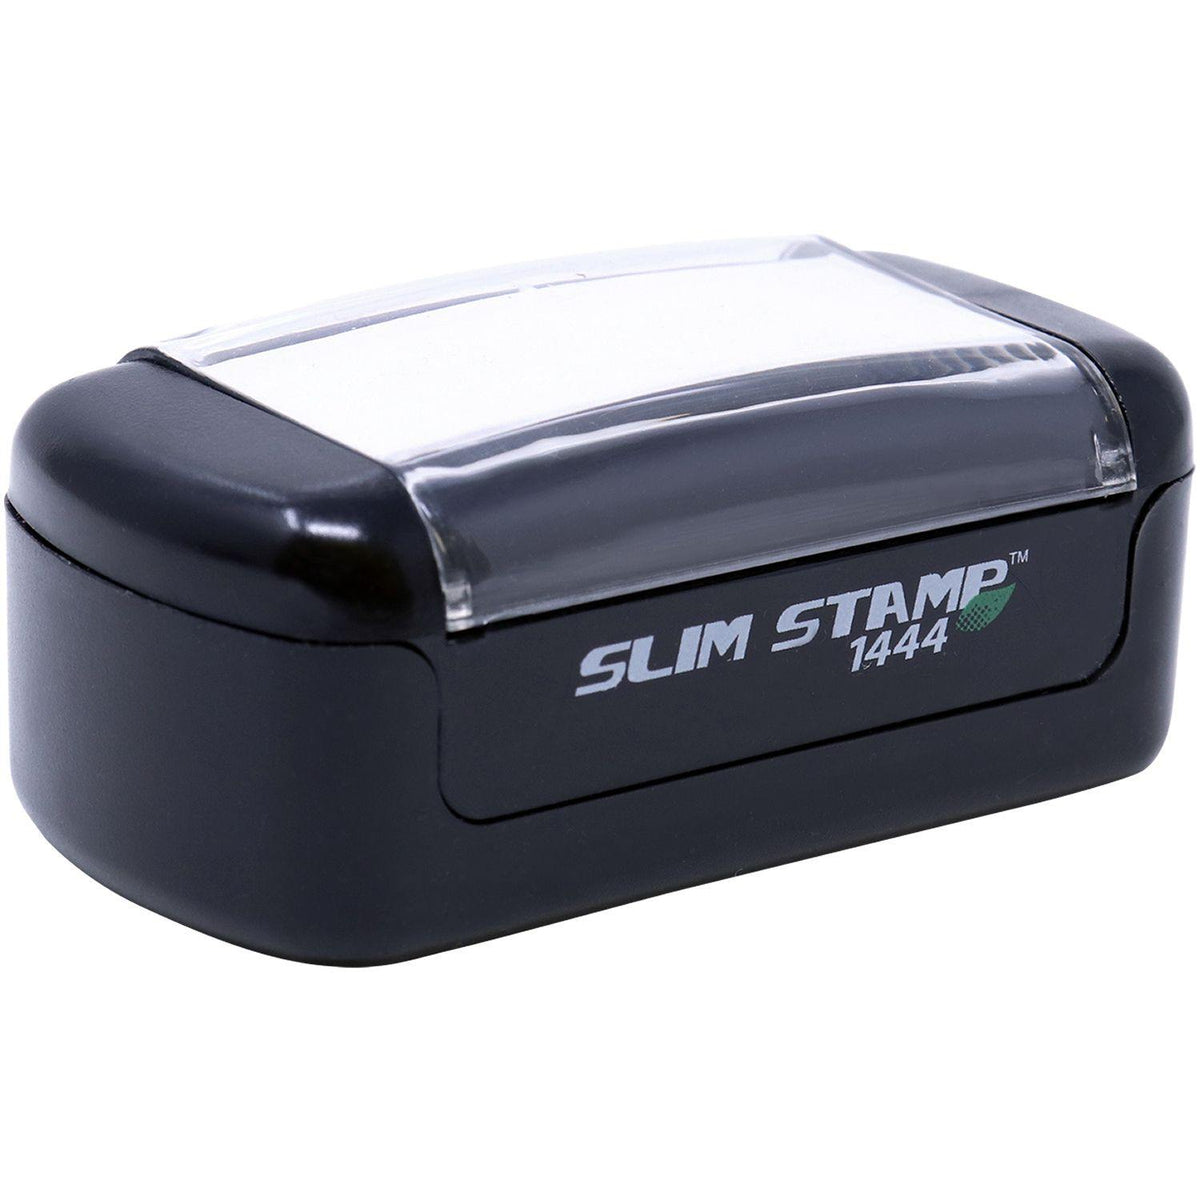 Slim Pre-Inked Bold Distributed Stamp - Engineer Seal Stamps - Brand_Slim, Impression Size_Small, Stamp Type_Pre-Inked Stamp, Type of Use_Office